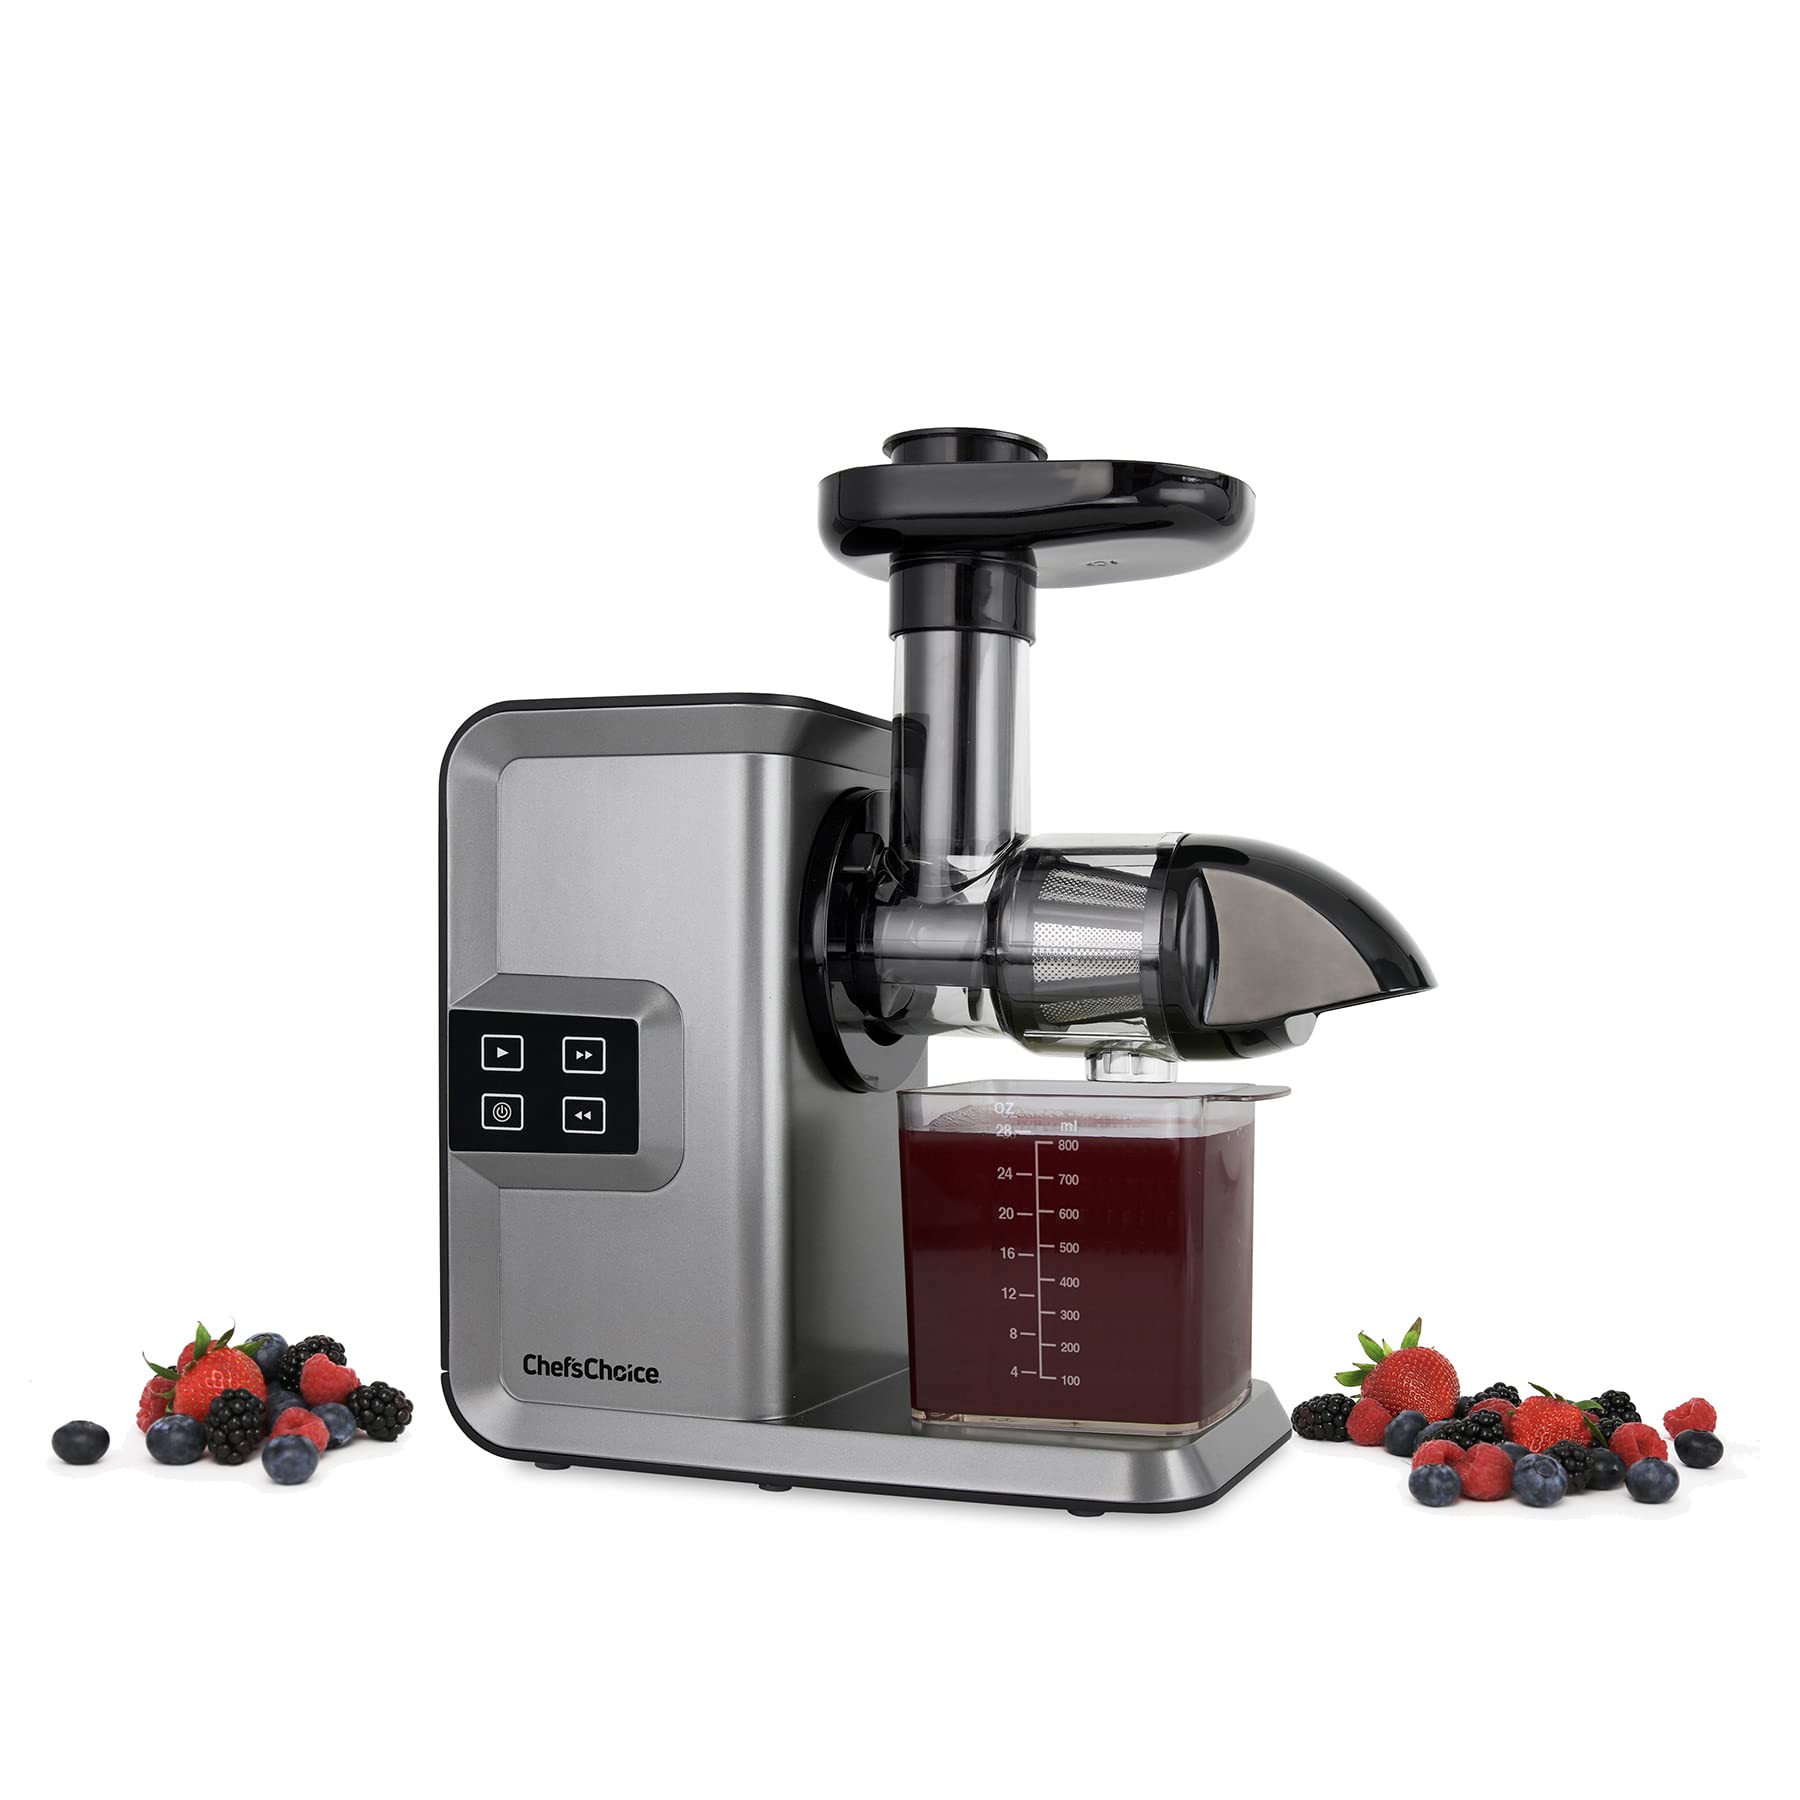 Chef’sChoice Juicer Cold Press Masticating For Fruits Vegetables and Greens, 150-Watts, Silver (Renewed Premium)